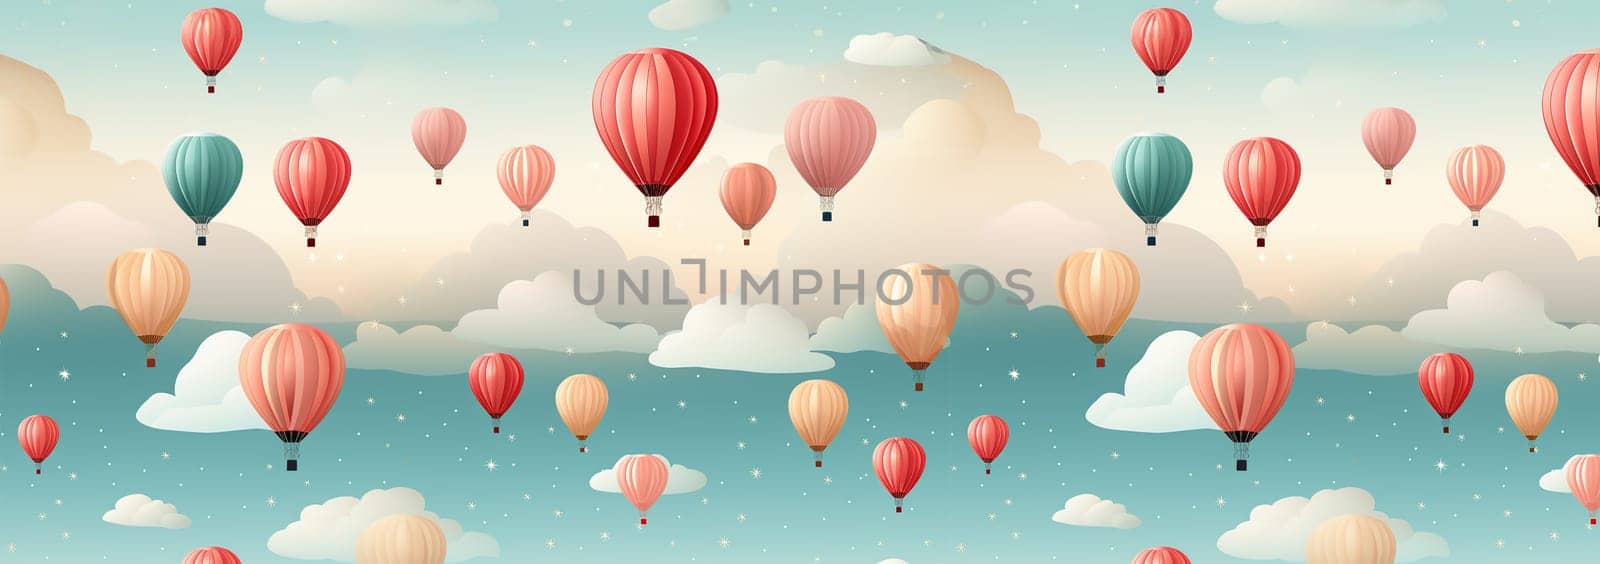 Cute pastel colored Boho seamless pattern with hot air balloons and clouds. Hand drawn balloon in the sky.Pastel neutral shades. Cute baby background. Funny decor for nursery, textiles, clothing, packaging, interior. by Annebel146